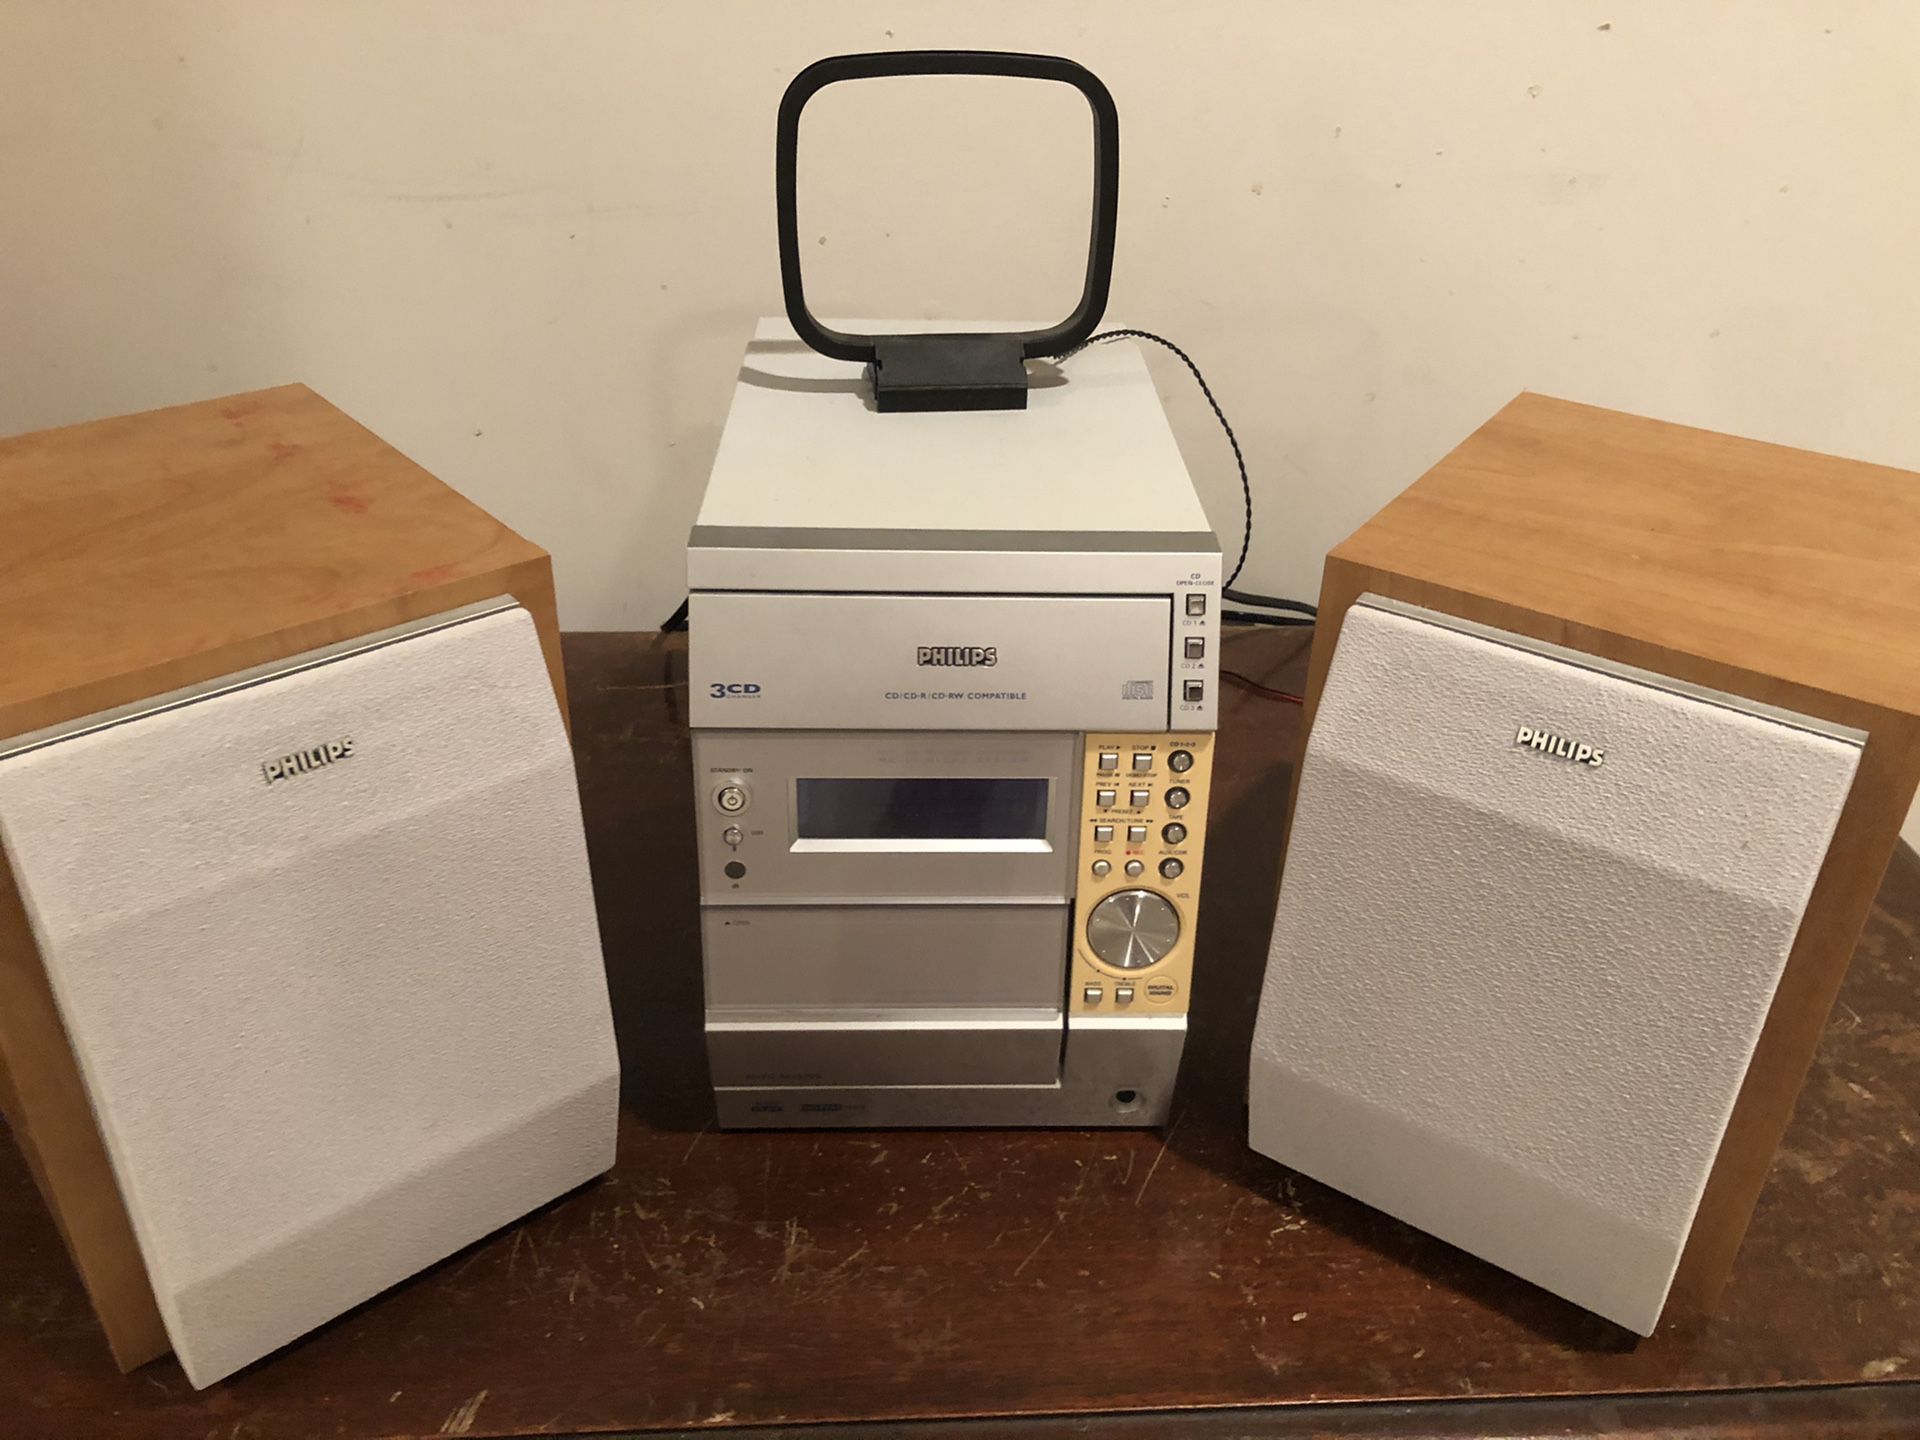 Philips Micro Hi-Fi System with 3 CD Changer and speaker set